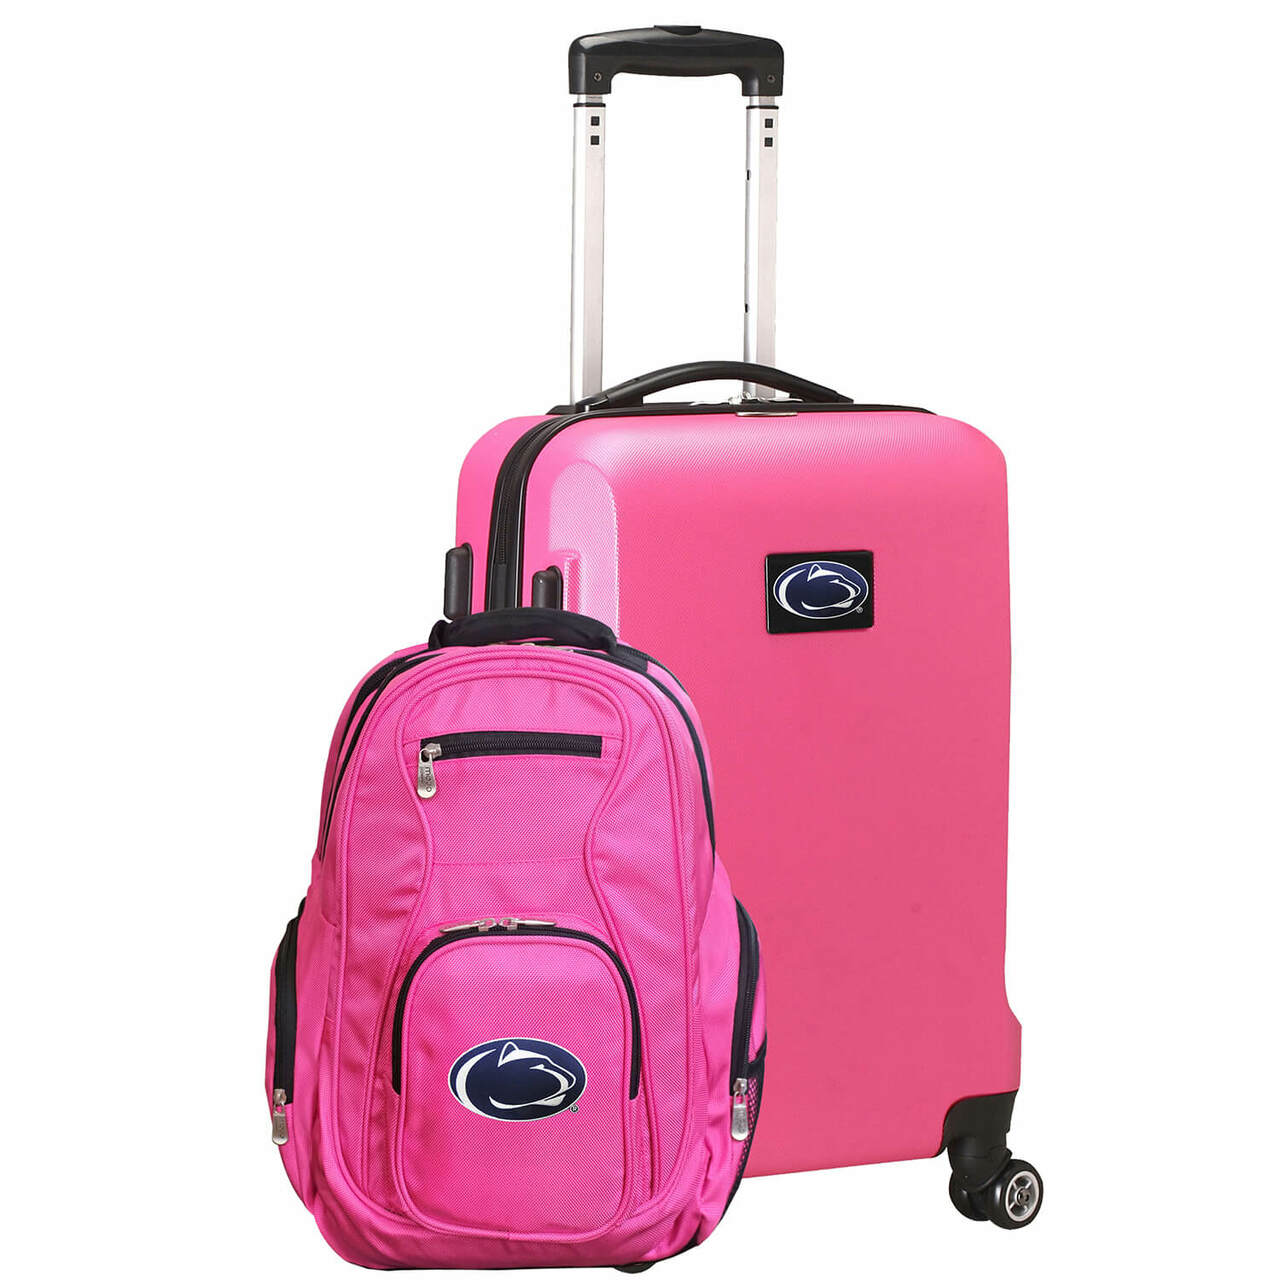 Penn State Nittany Lions Deluxe 2-Piece Backpack and Carry-on Set in Pink